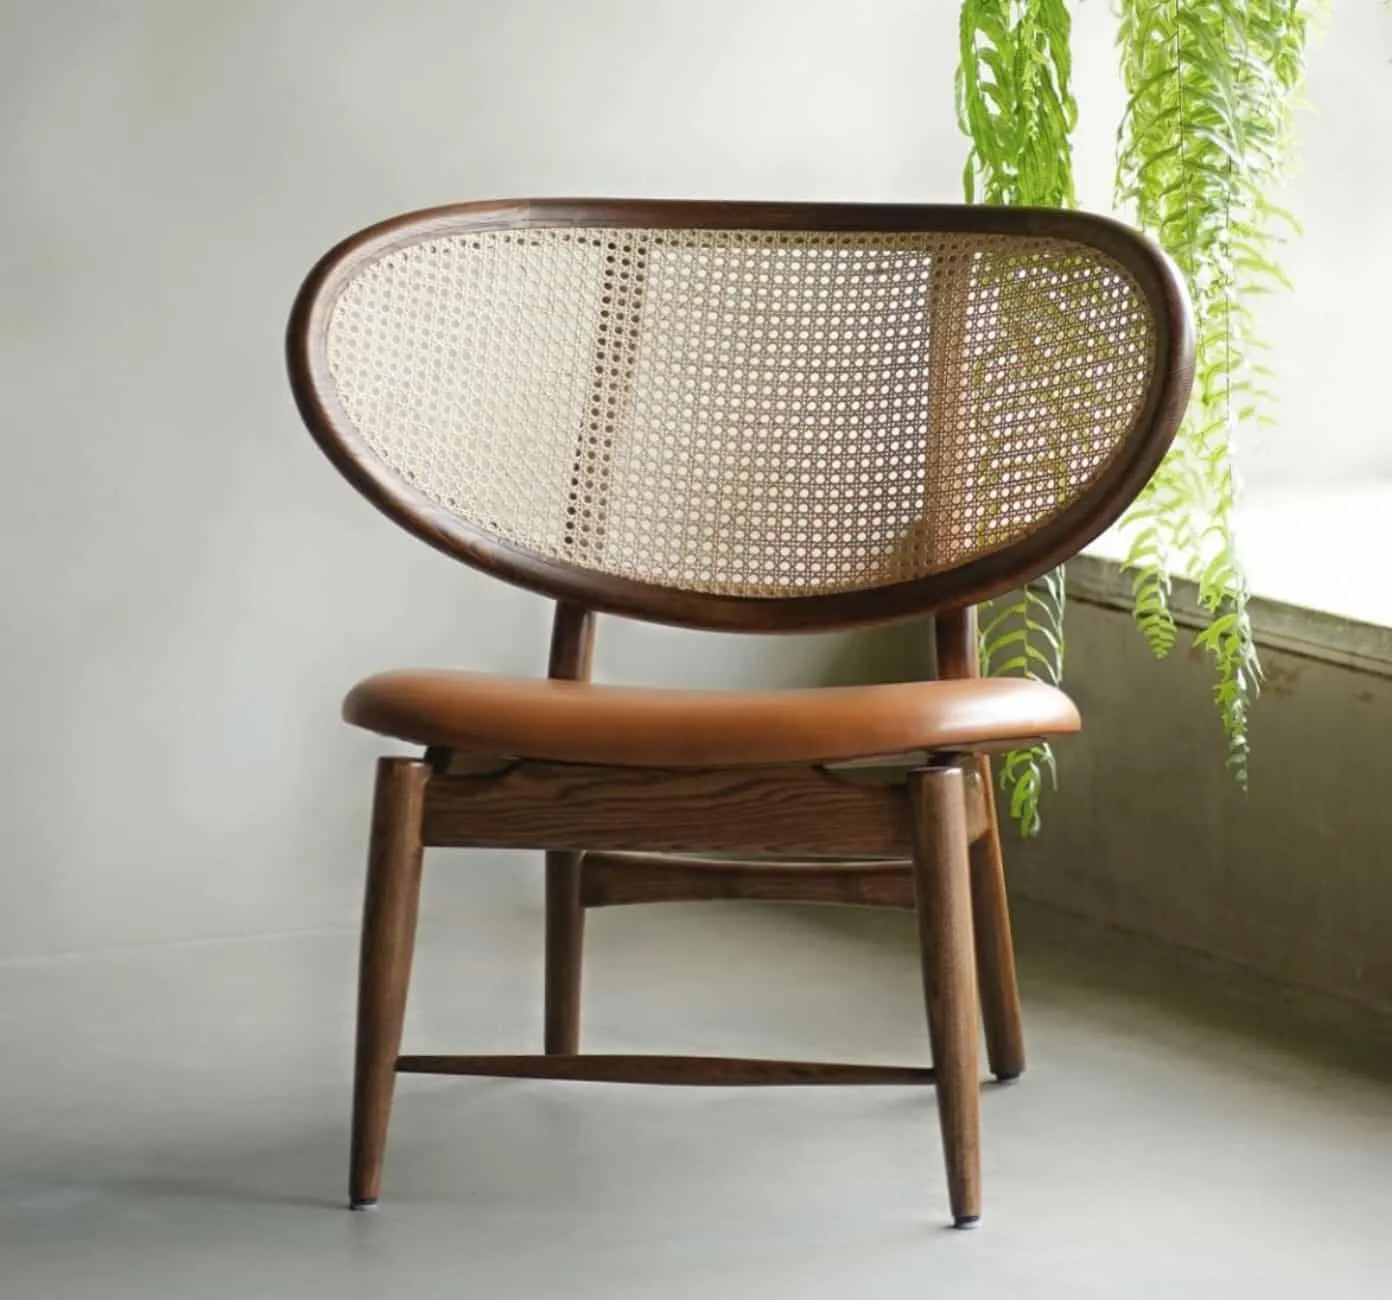 Rattan chair for exteriors